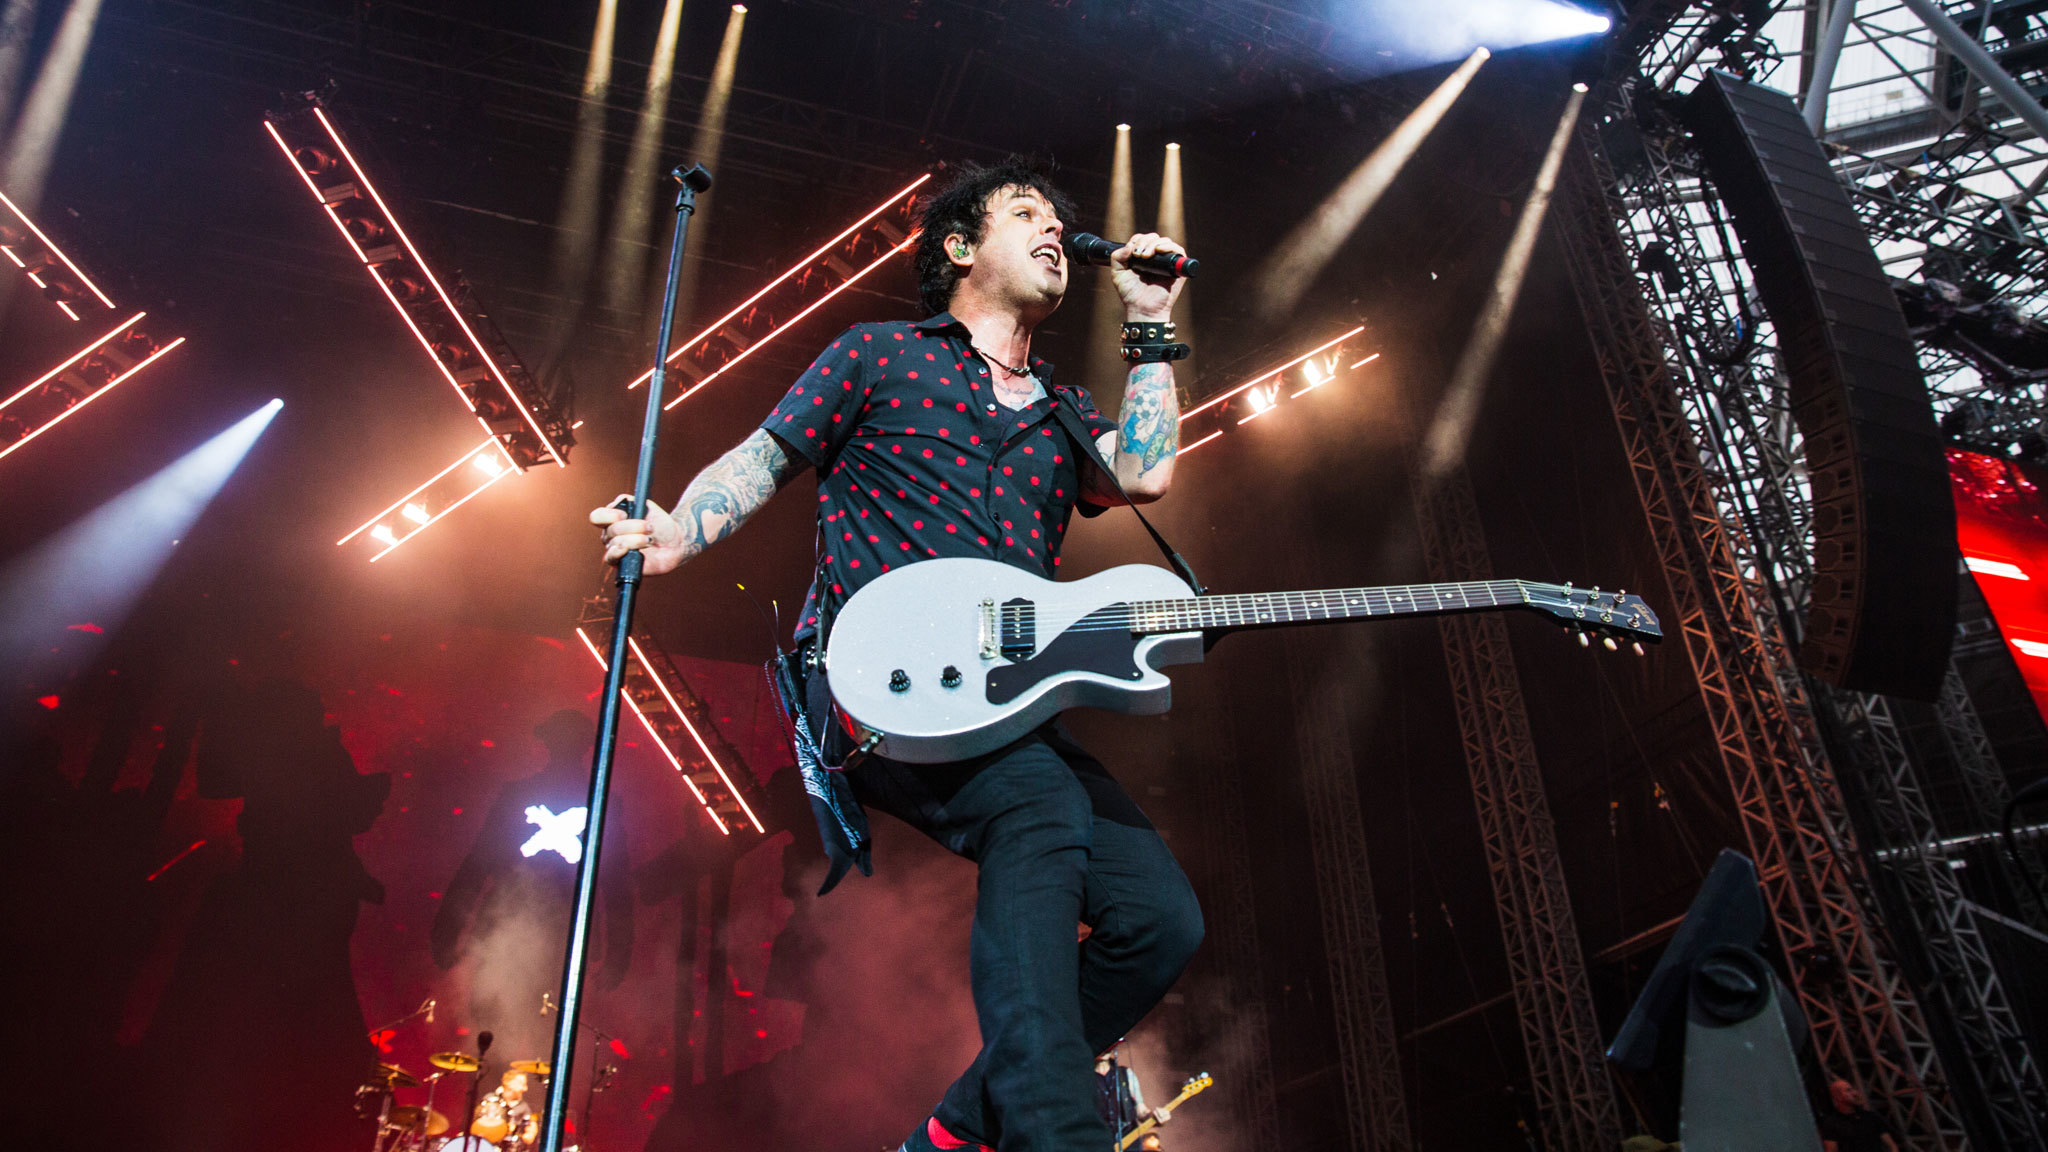 Green Day are teasing something with new video and website